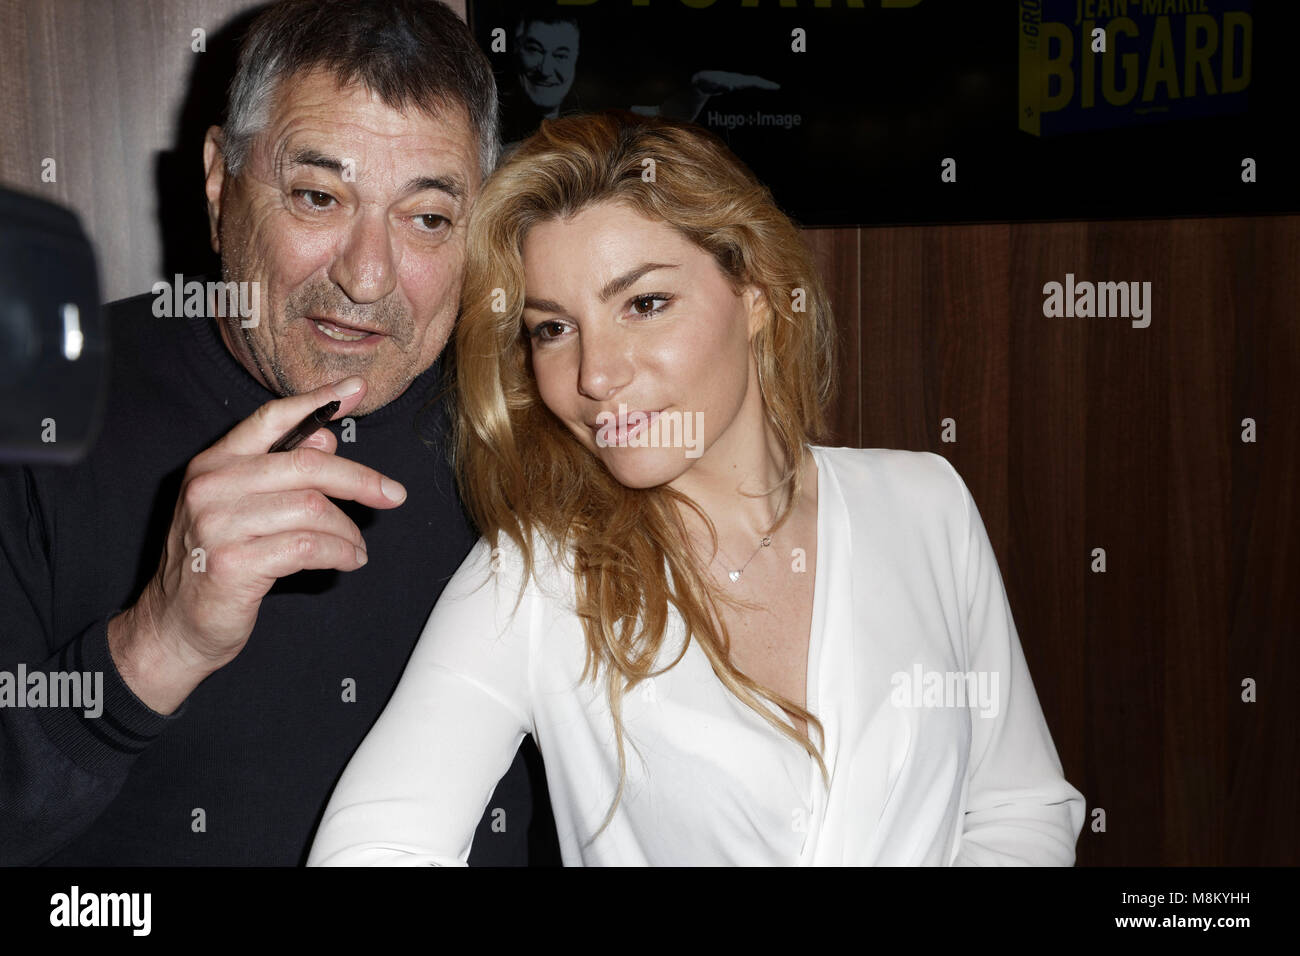 Paris, France. 17th March 2018. Jean-Marie Bigard and Lola Marois in dedication at the book fair in Paris, France. Credit: Bernard Menigault/Alamy Live News Stock Photo